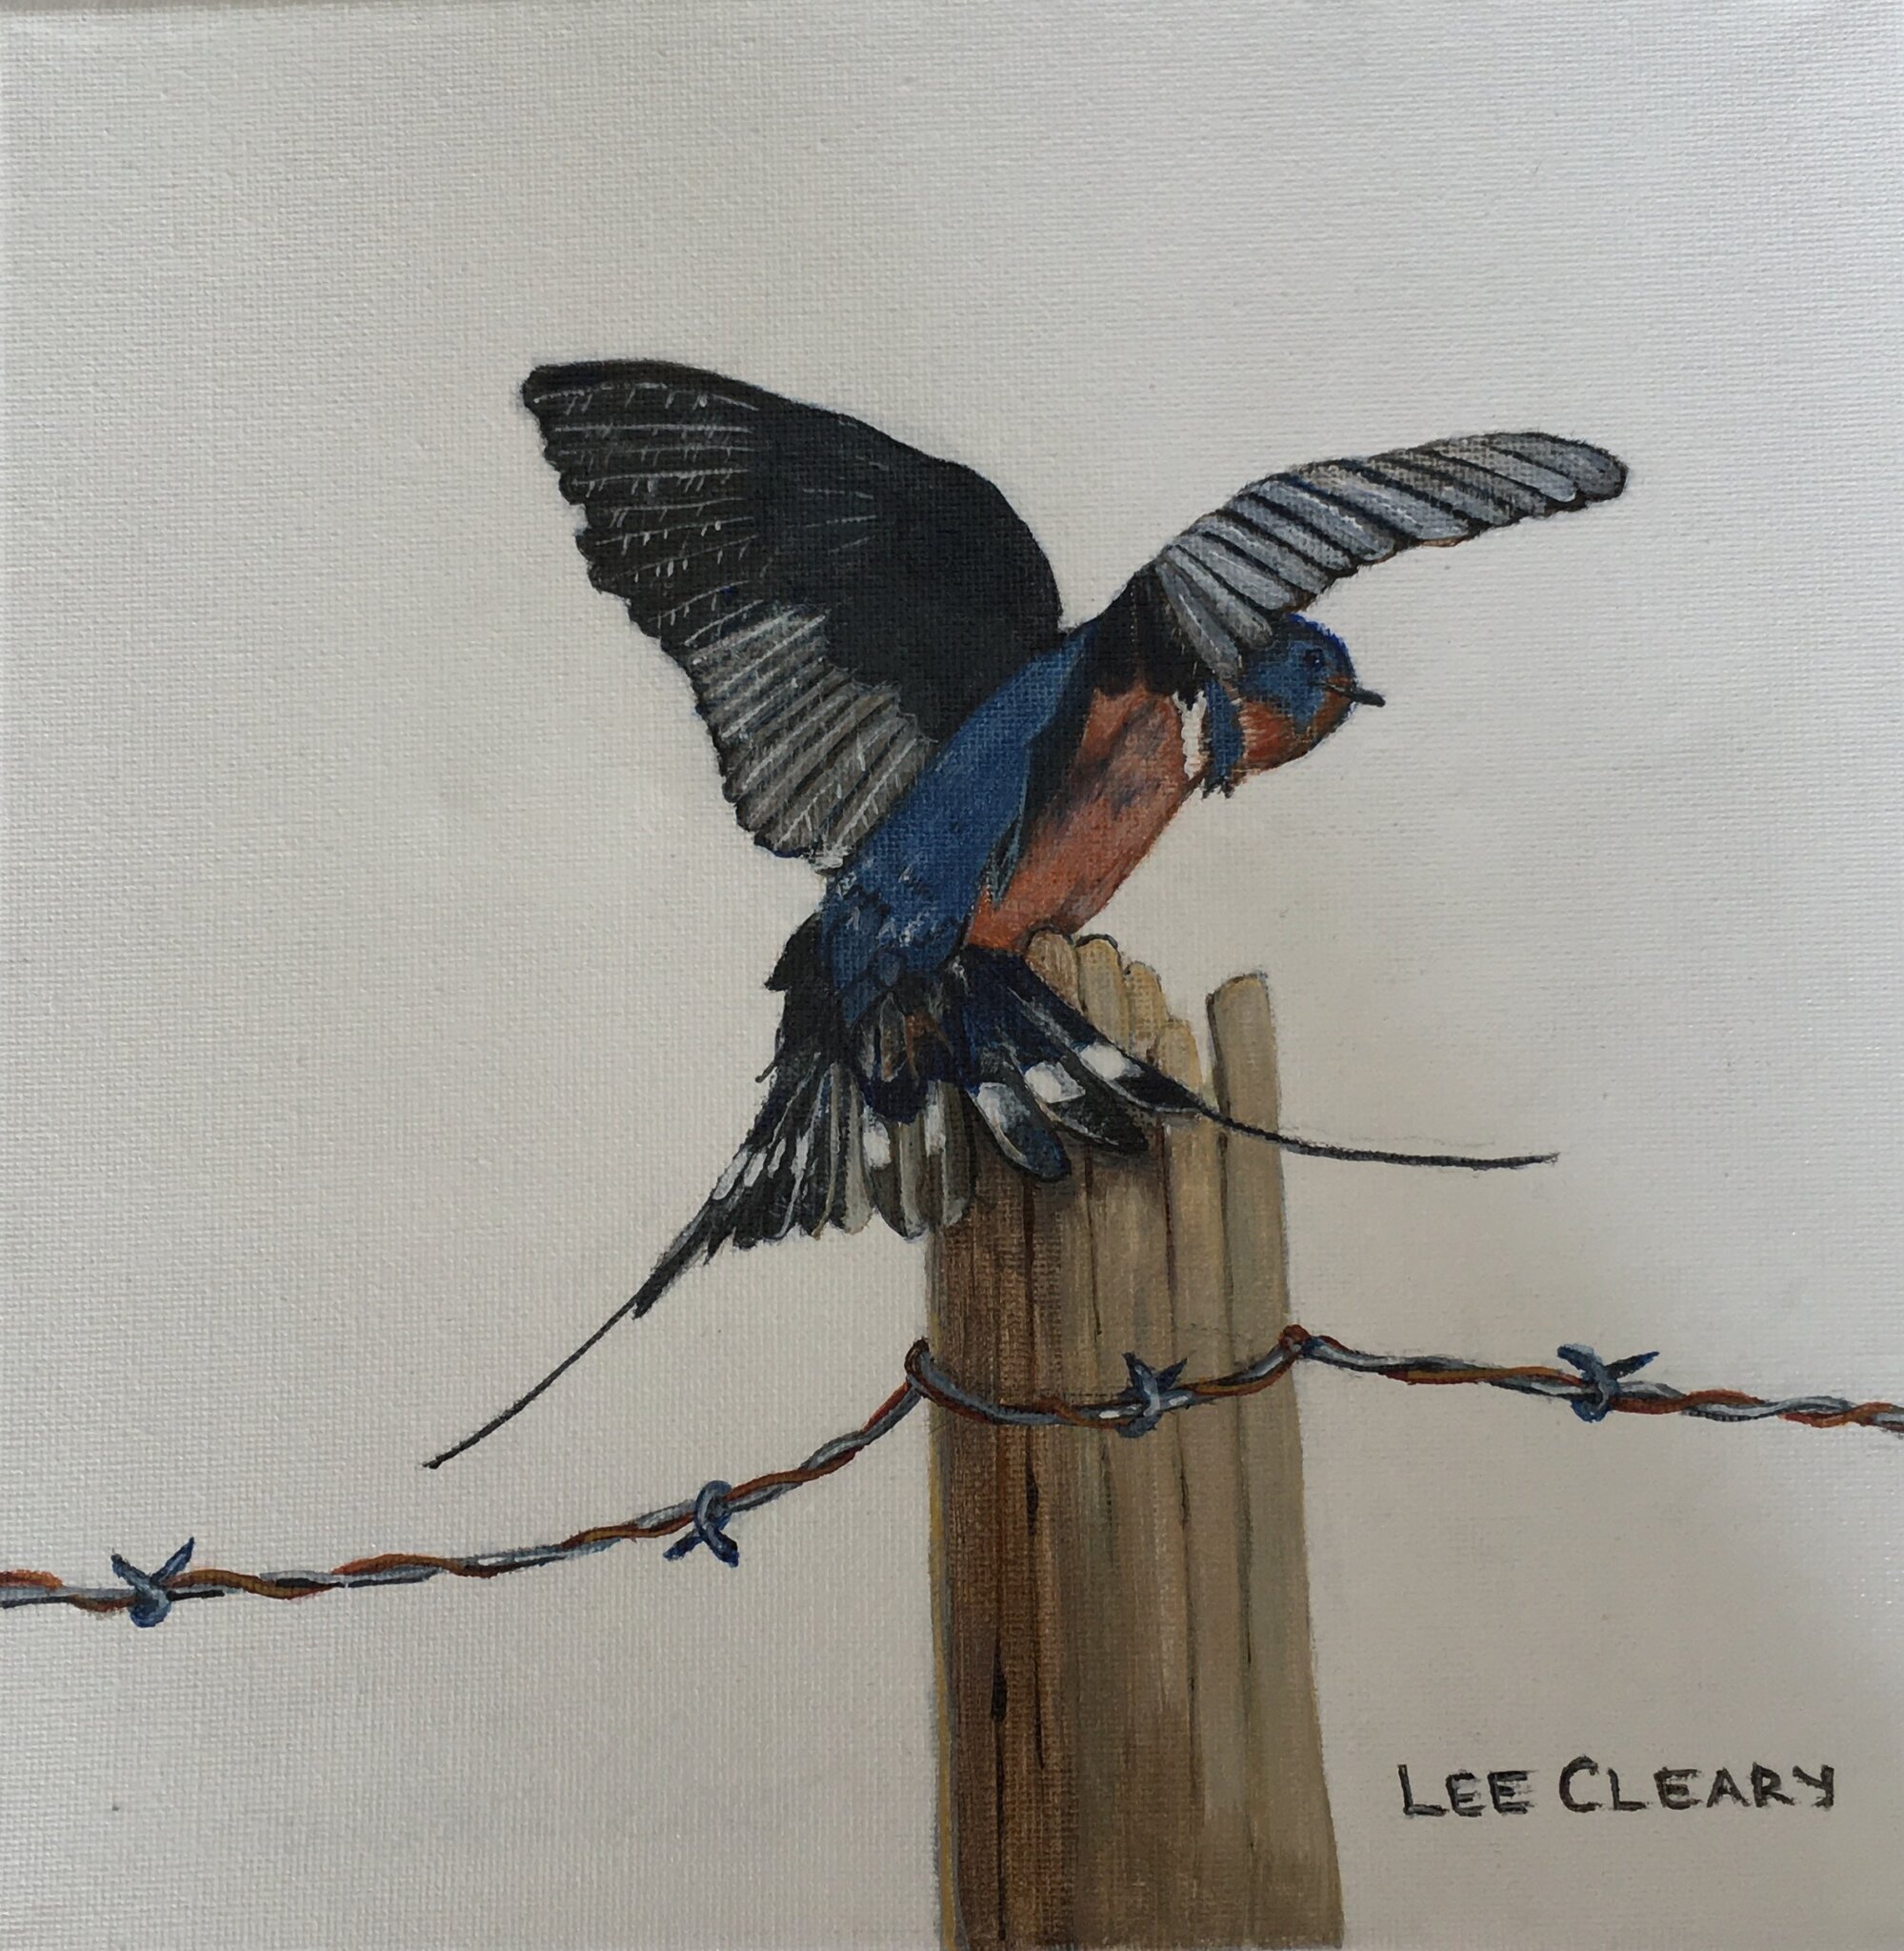 Lee Cleary's "Barnswallow at Twilight" painting